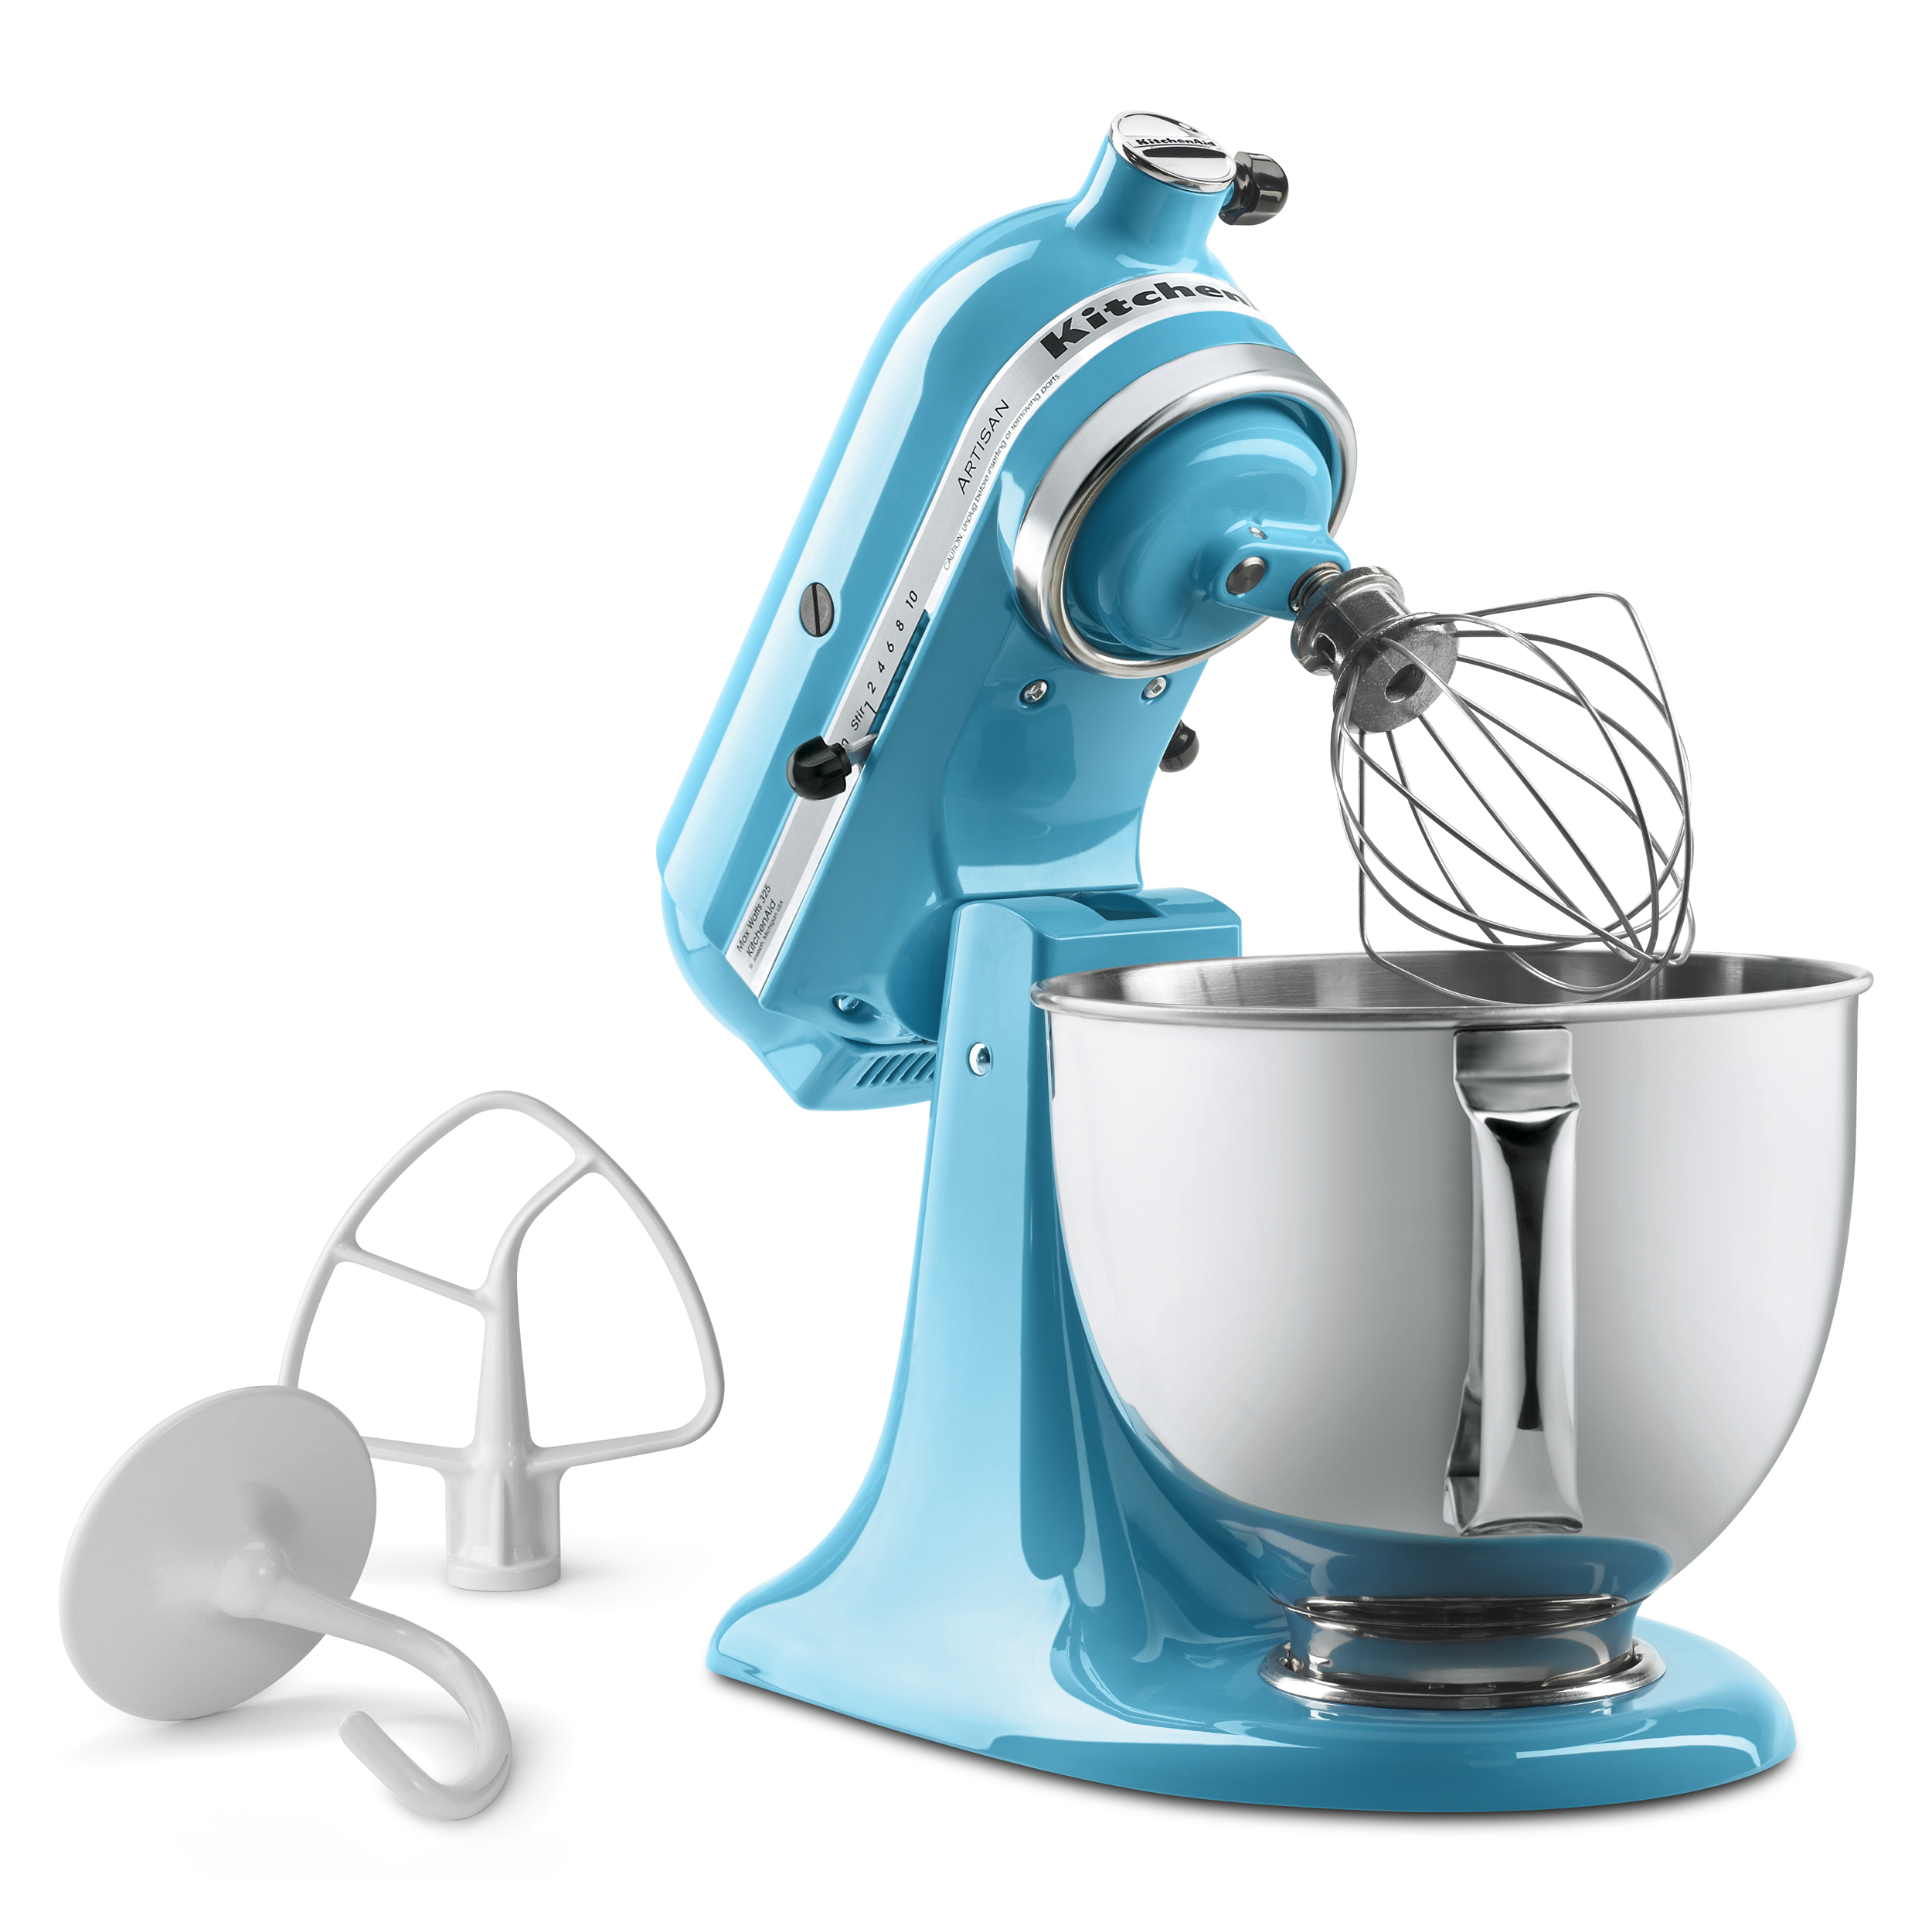 KitchenAid Artisan Series 5-Quart Tilt-Head Stand Mixer in Crystal Blue - KSM150PSCL - Closeout - image 3 of 4